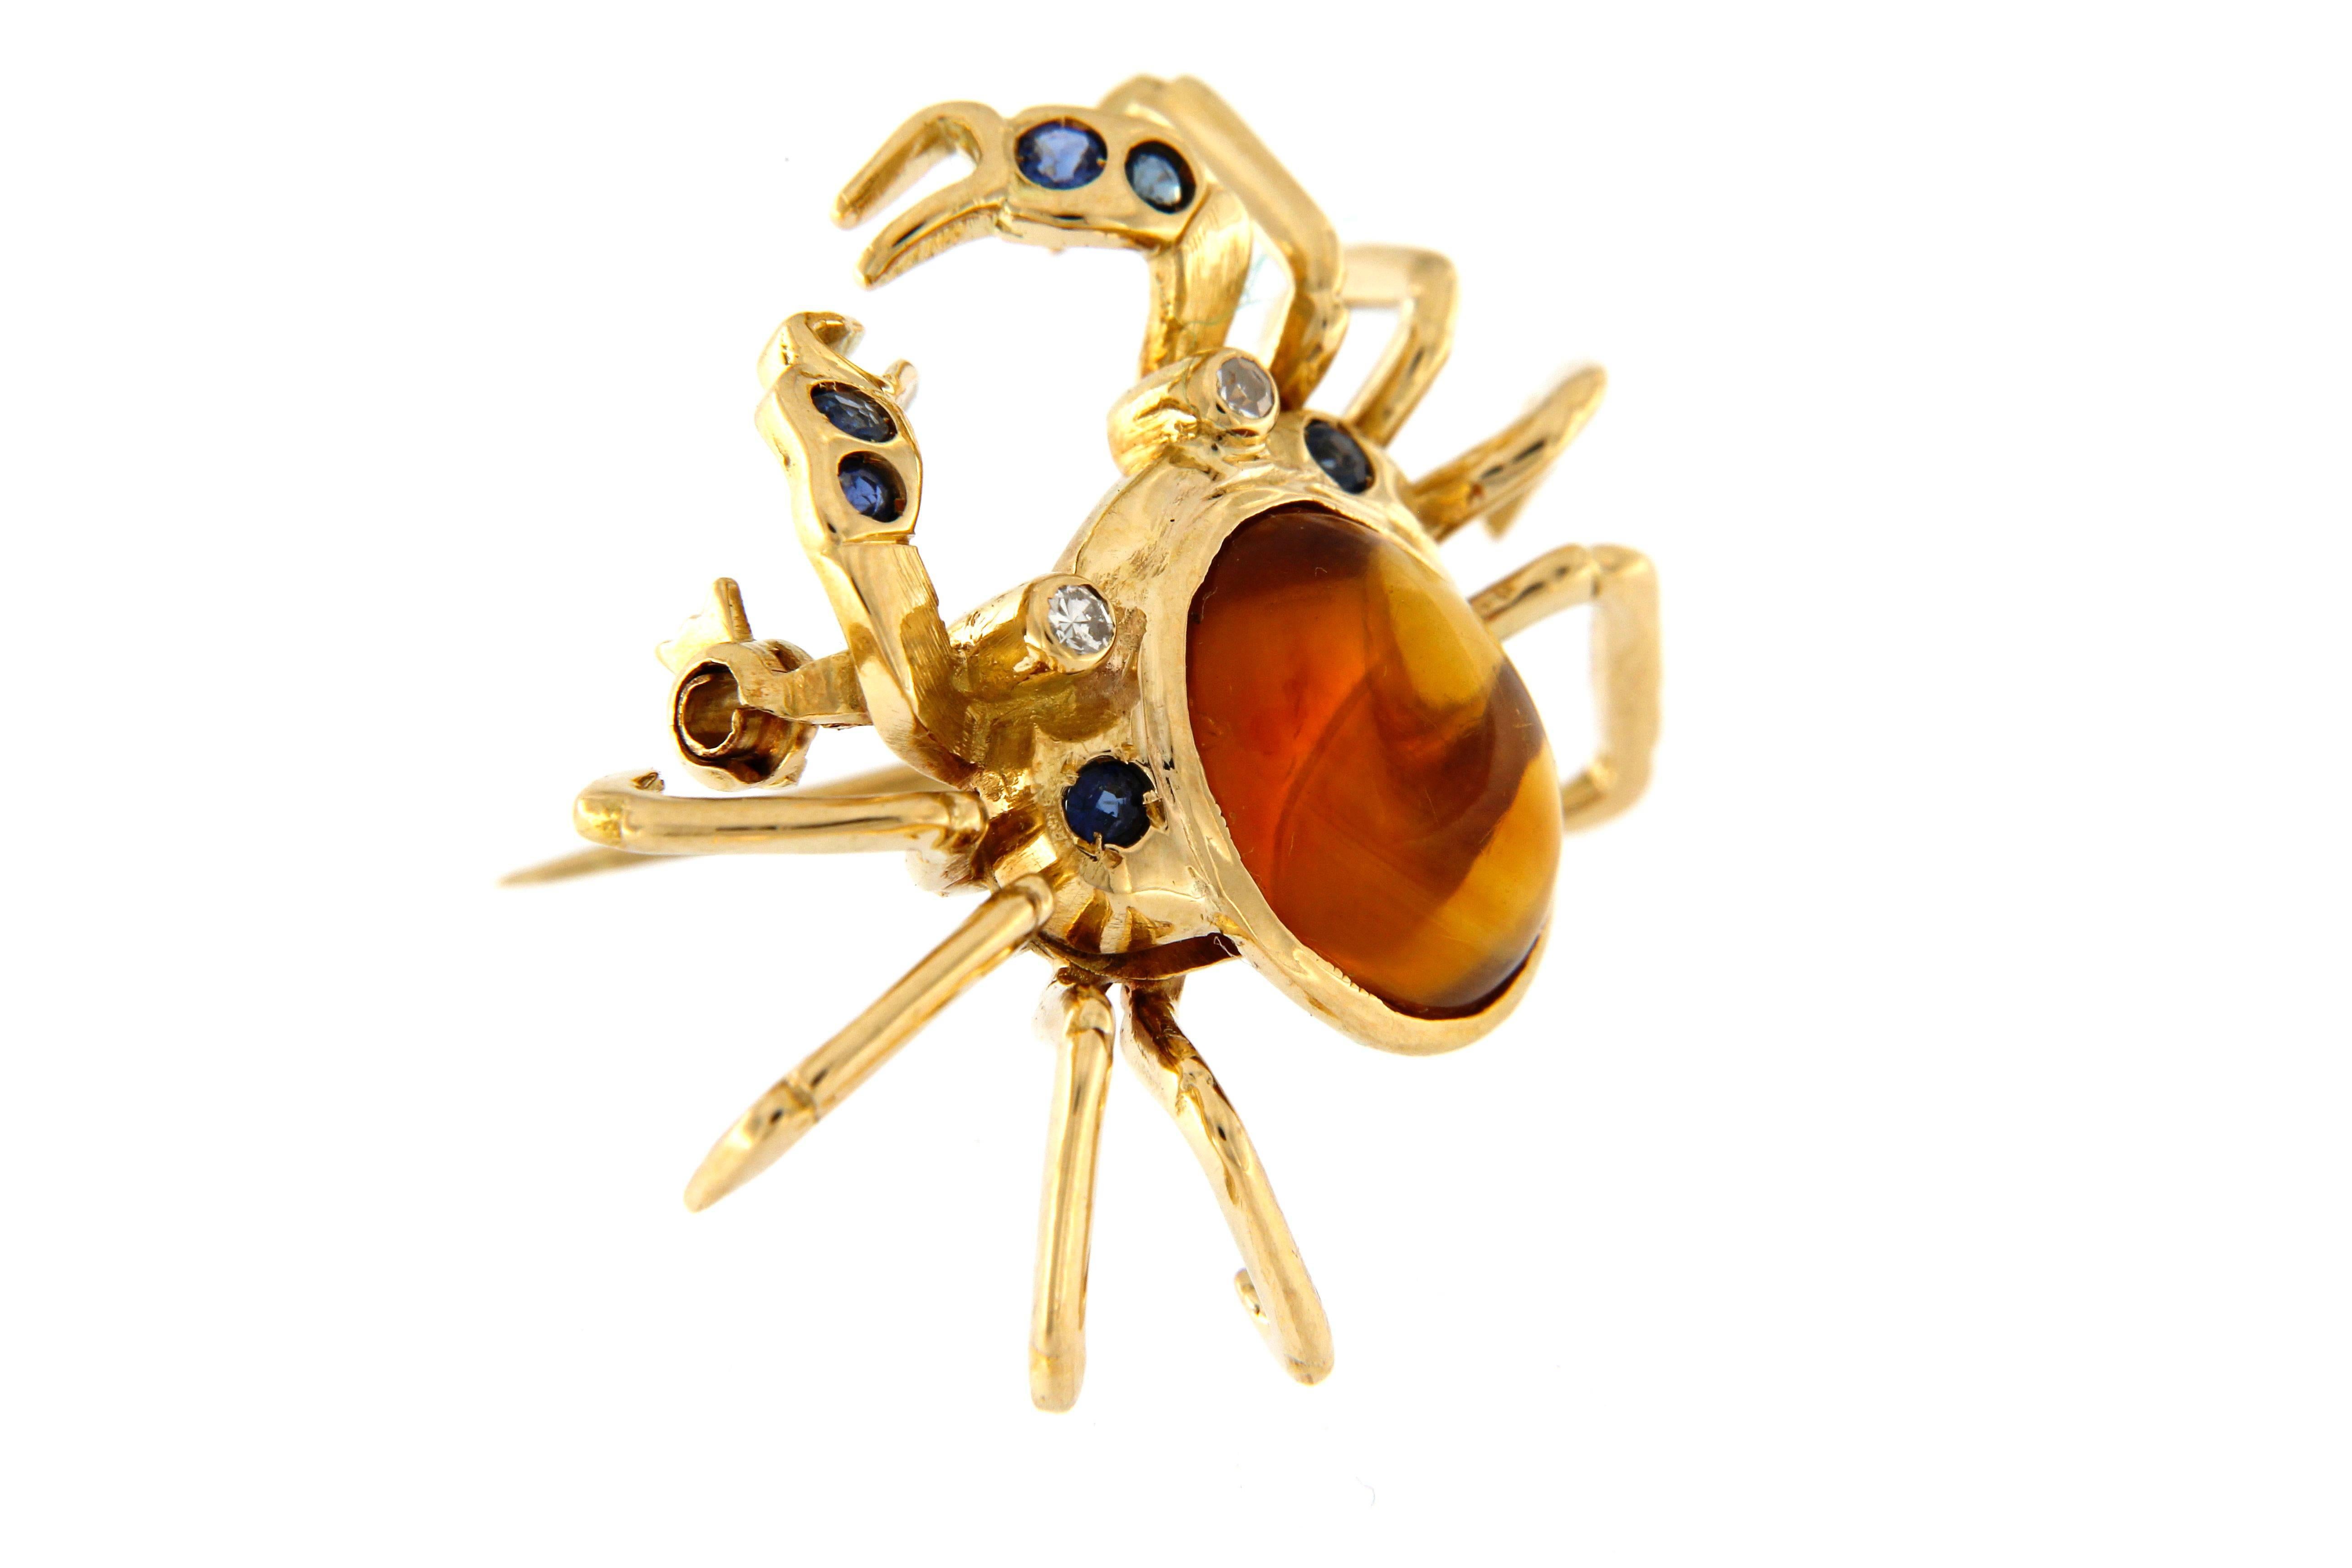 completely handmade, very nice brooche crab shaped set with Topaze, Sapphire and full cut diamonds